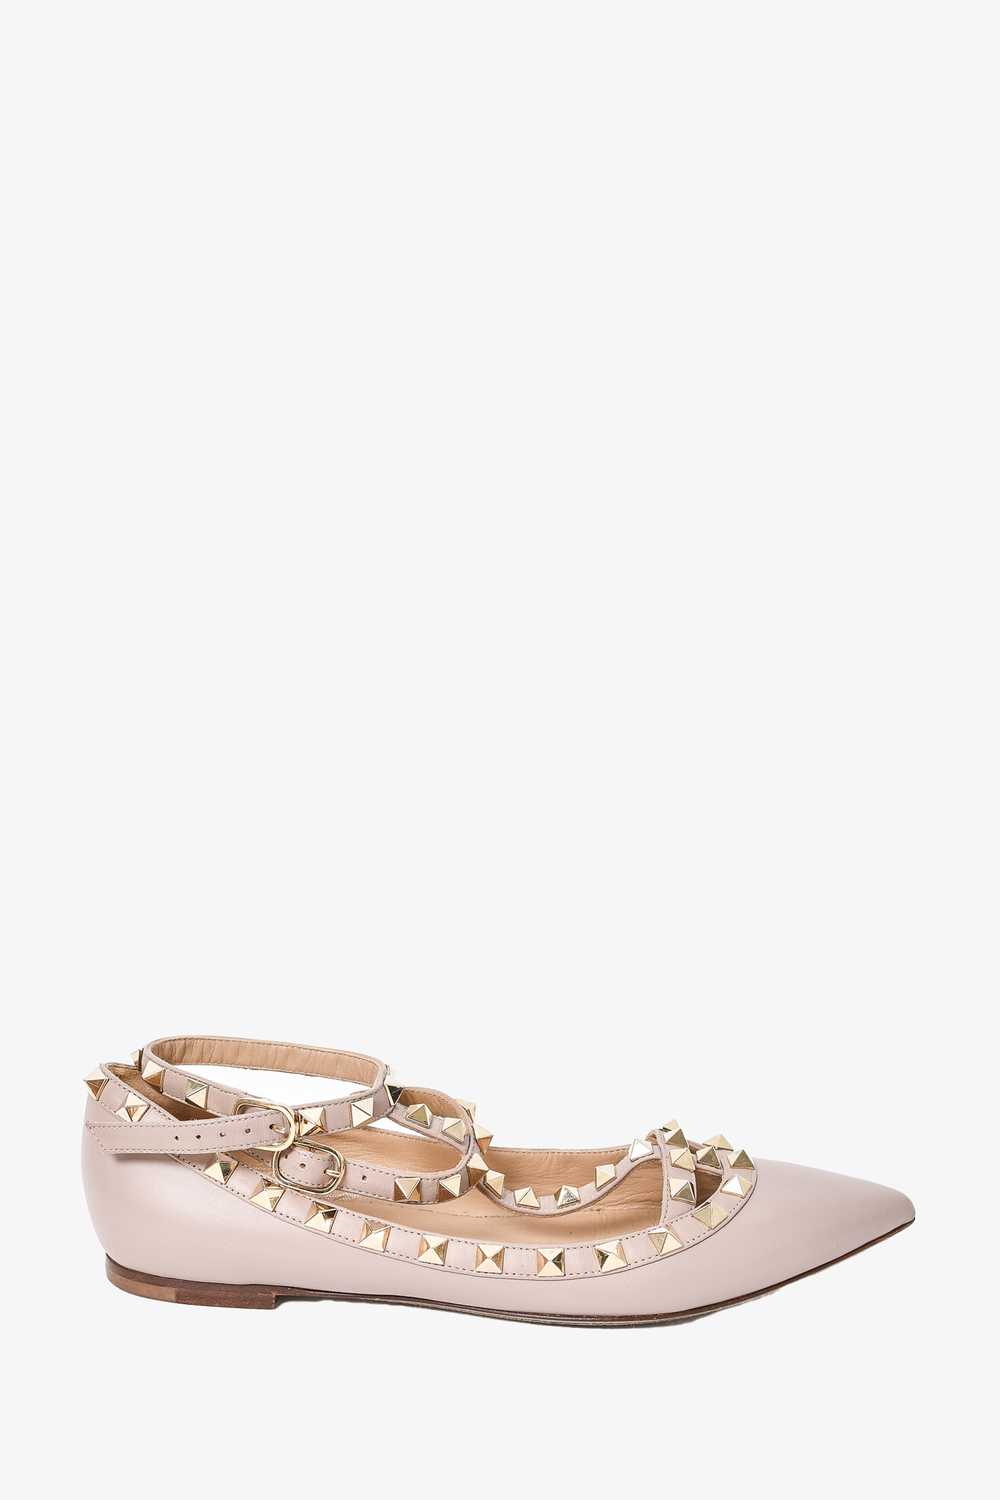 Valentino Beige Leather Pointed Toe Cage Rockstud… - image 1